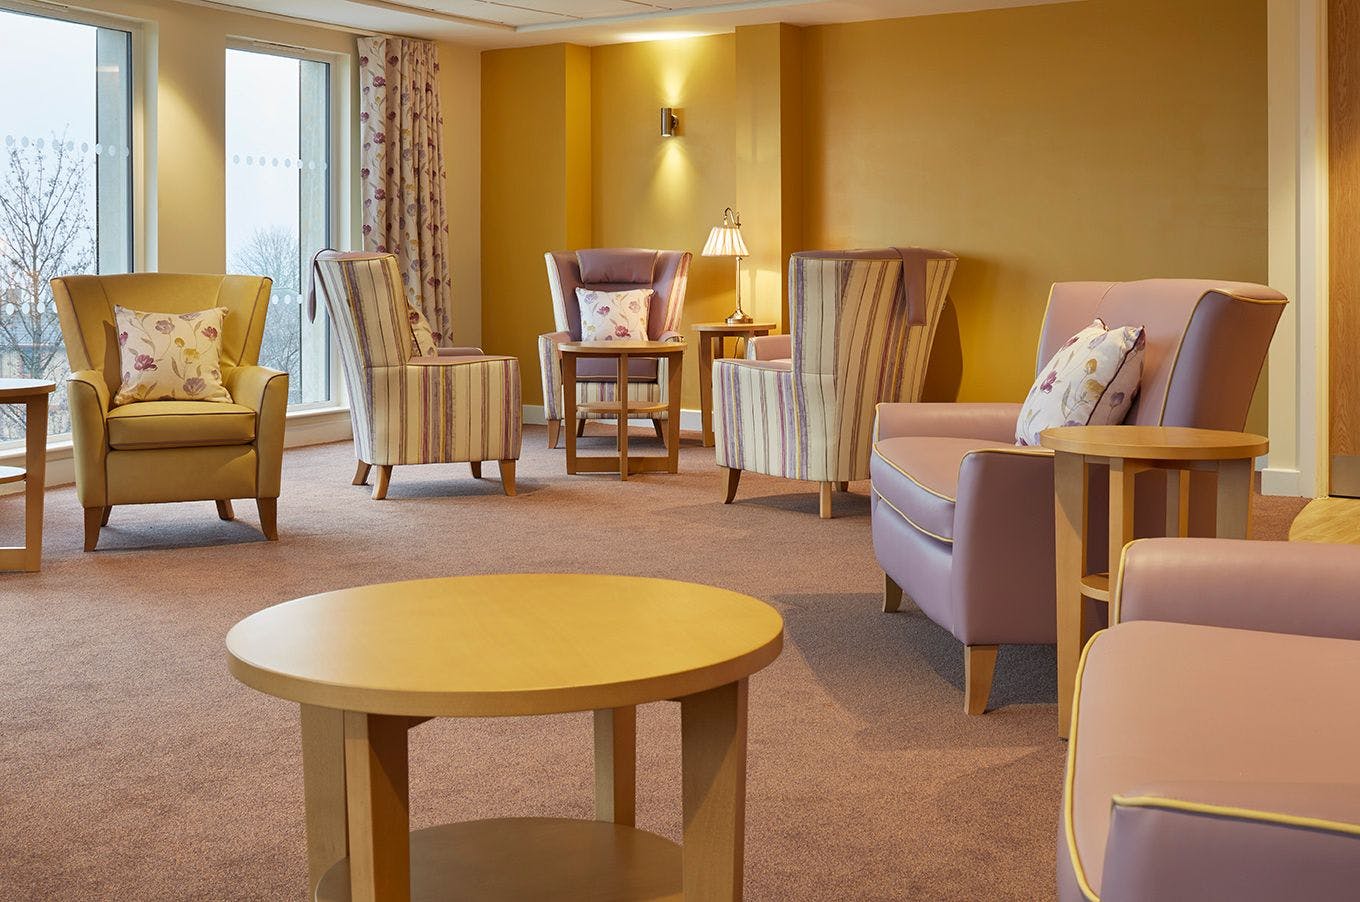 Lounge of Seacroft Green care home in Leeds, Yorkshire